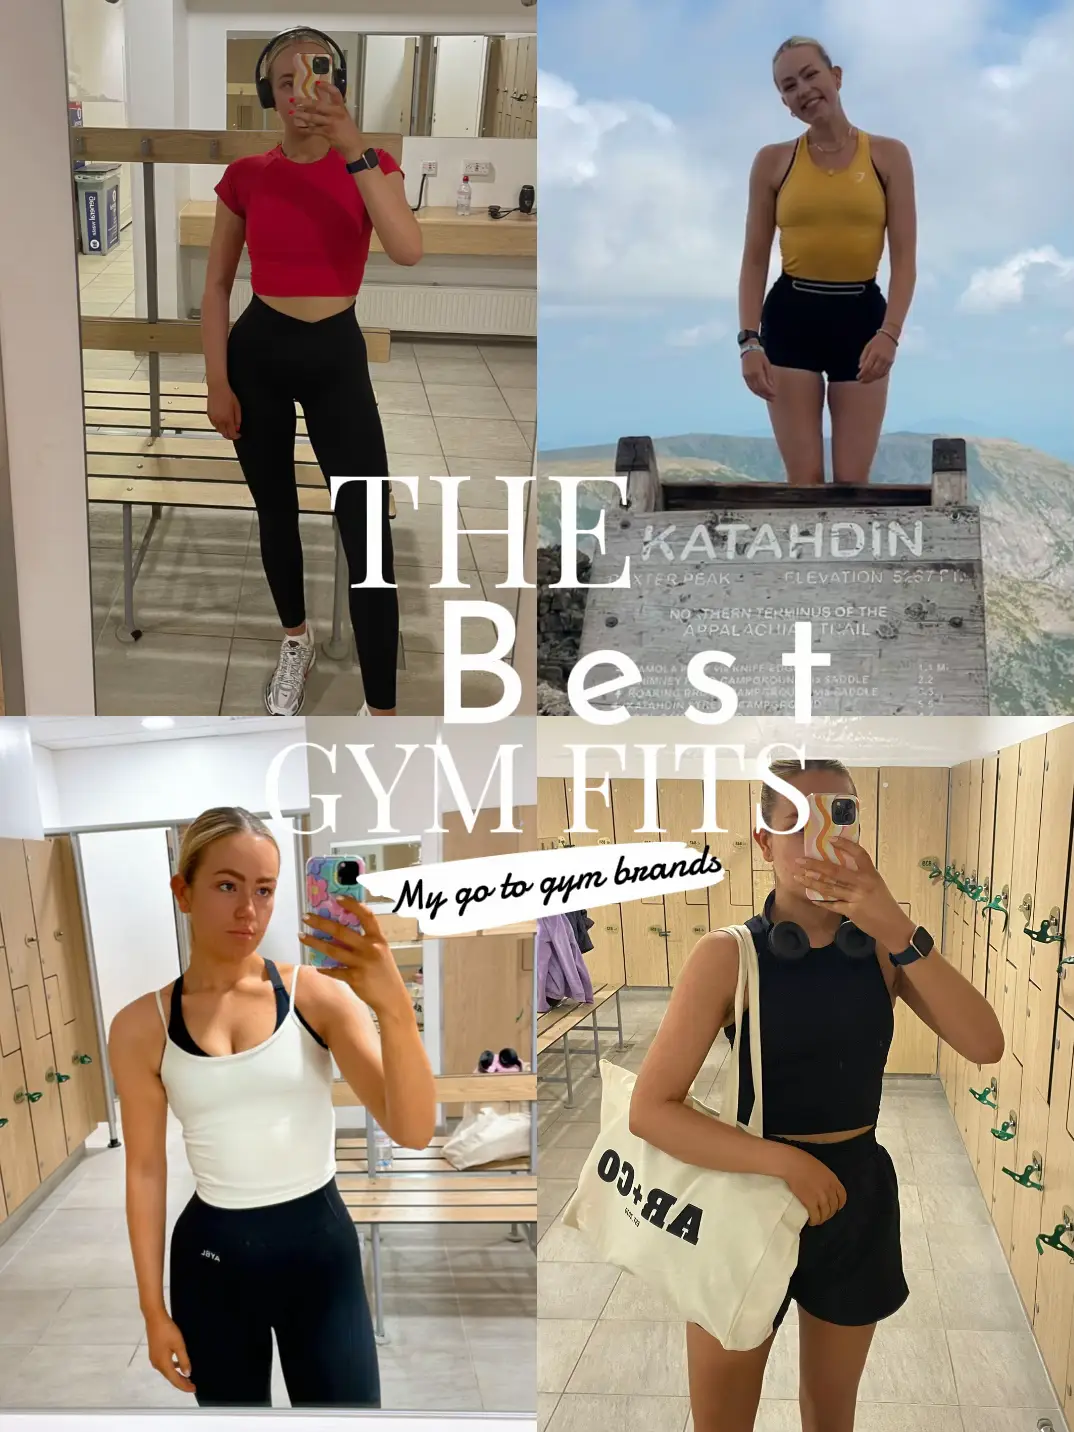 THE best gym leggings 🤍✨  Gallery posted by Itsthatgirljade